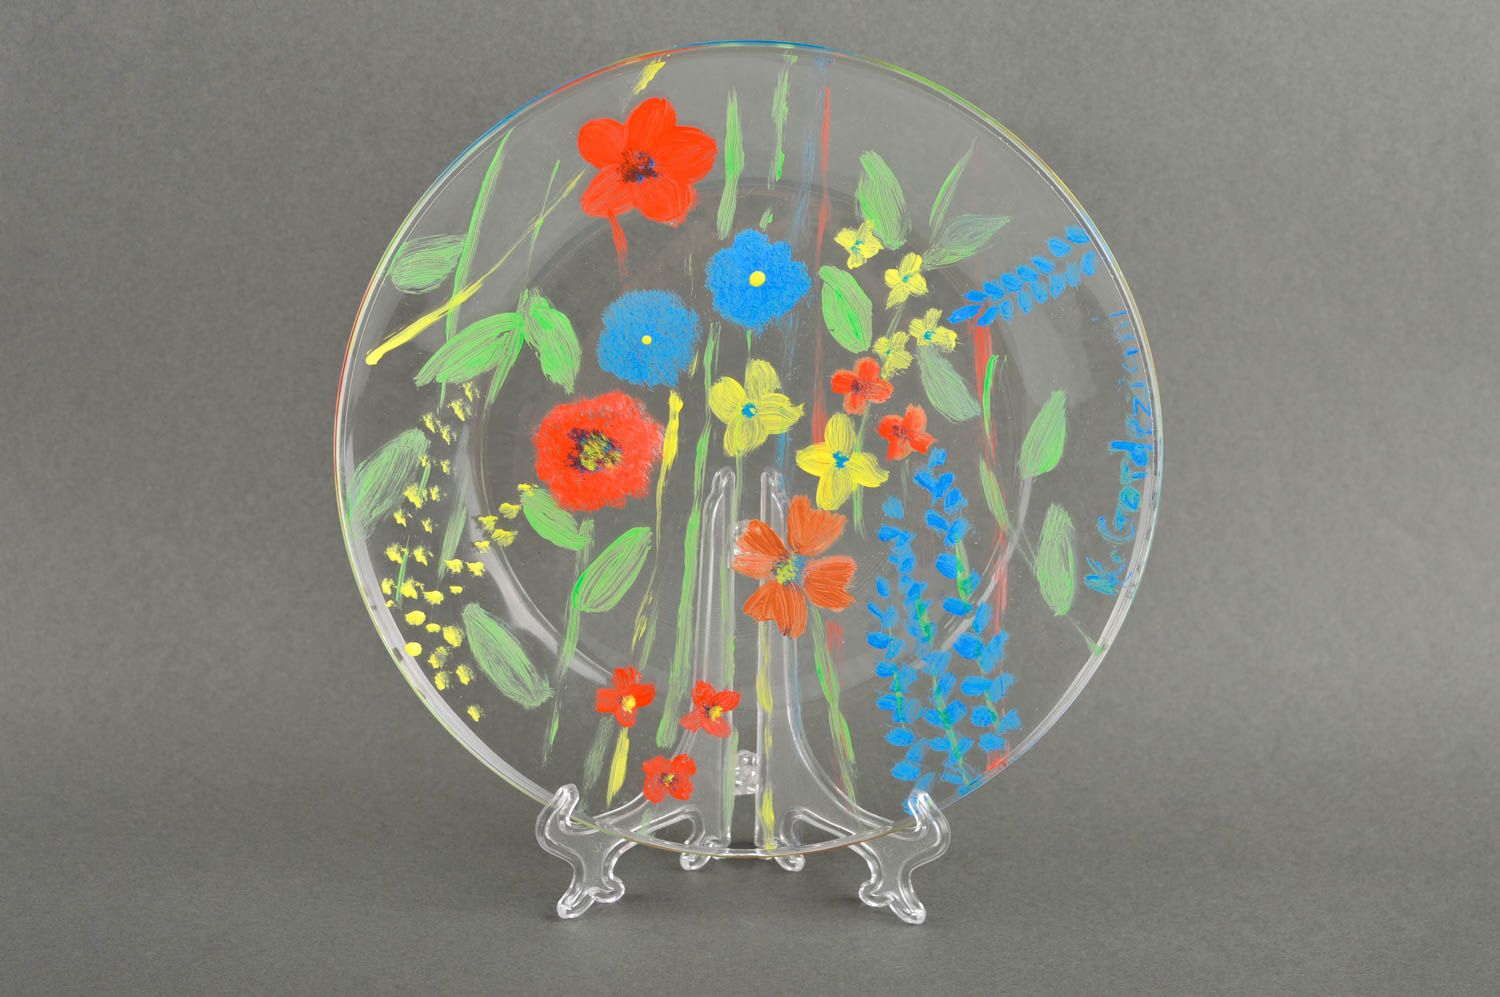 Handmade glass plate design decorative plates cool rooms decorative use only photo 2